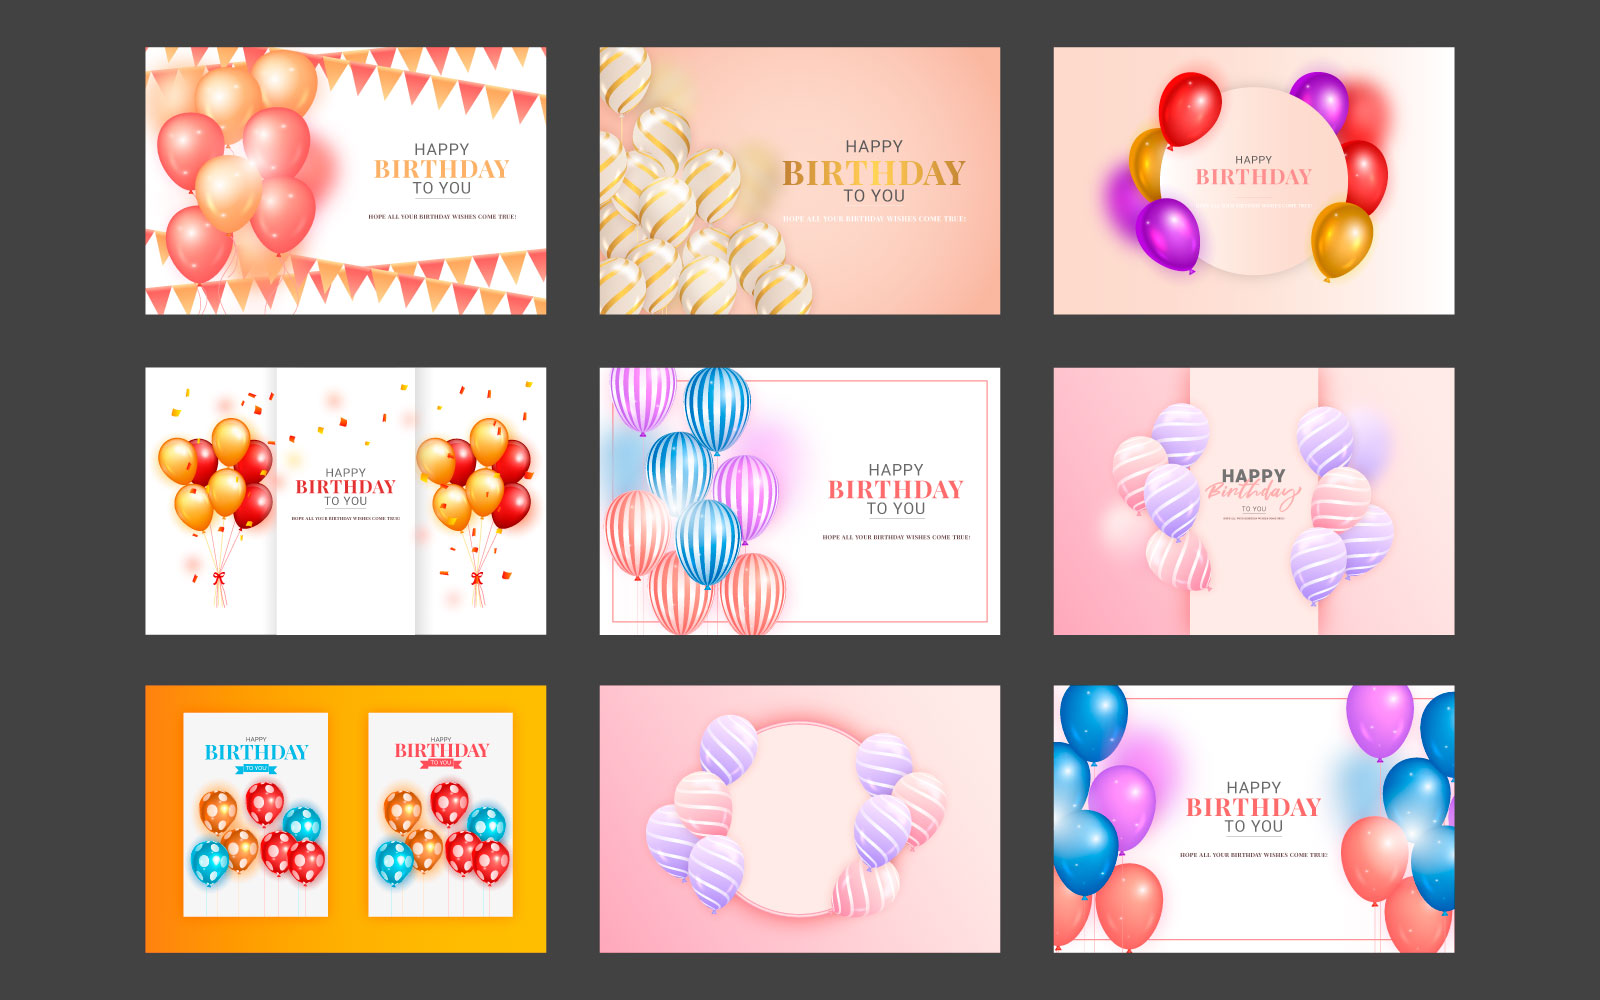 Birthday vector banner template set. Happy birthday to you text in white space background